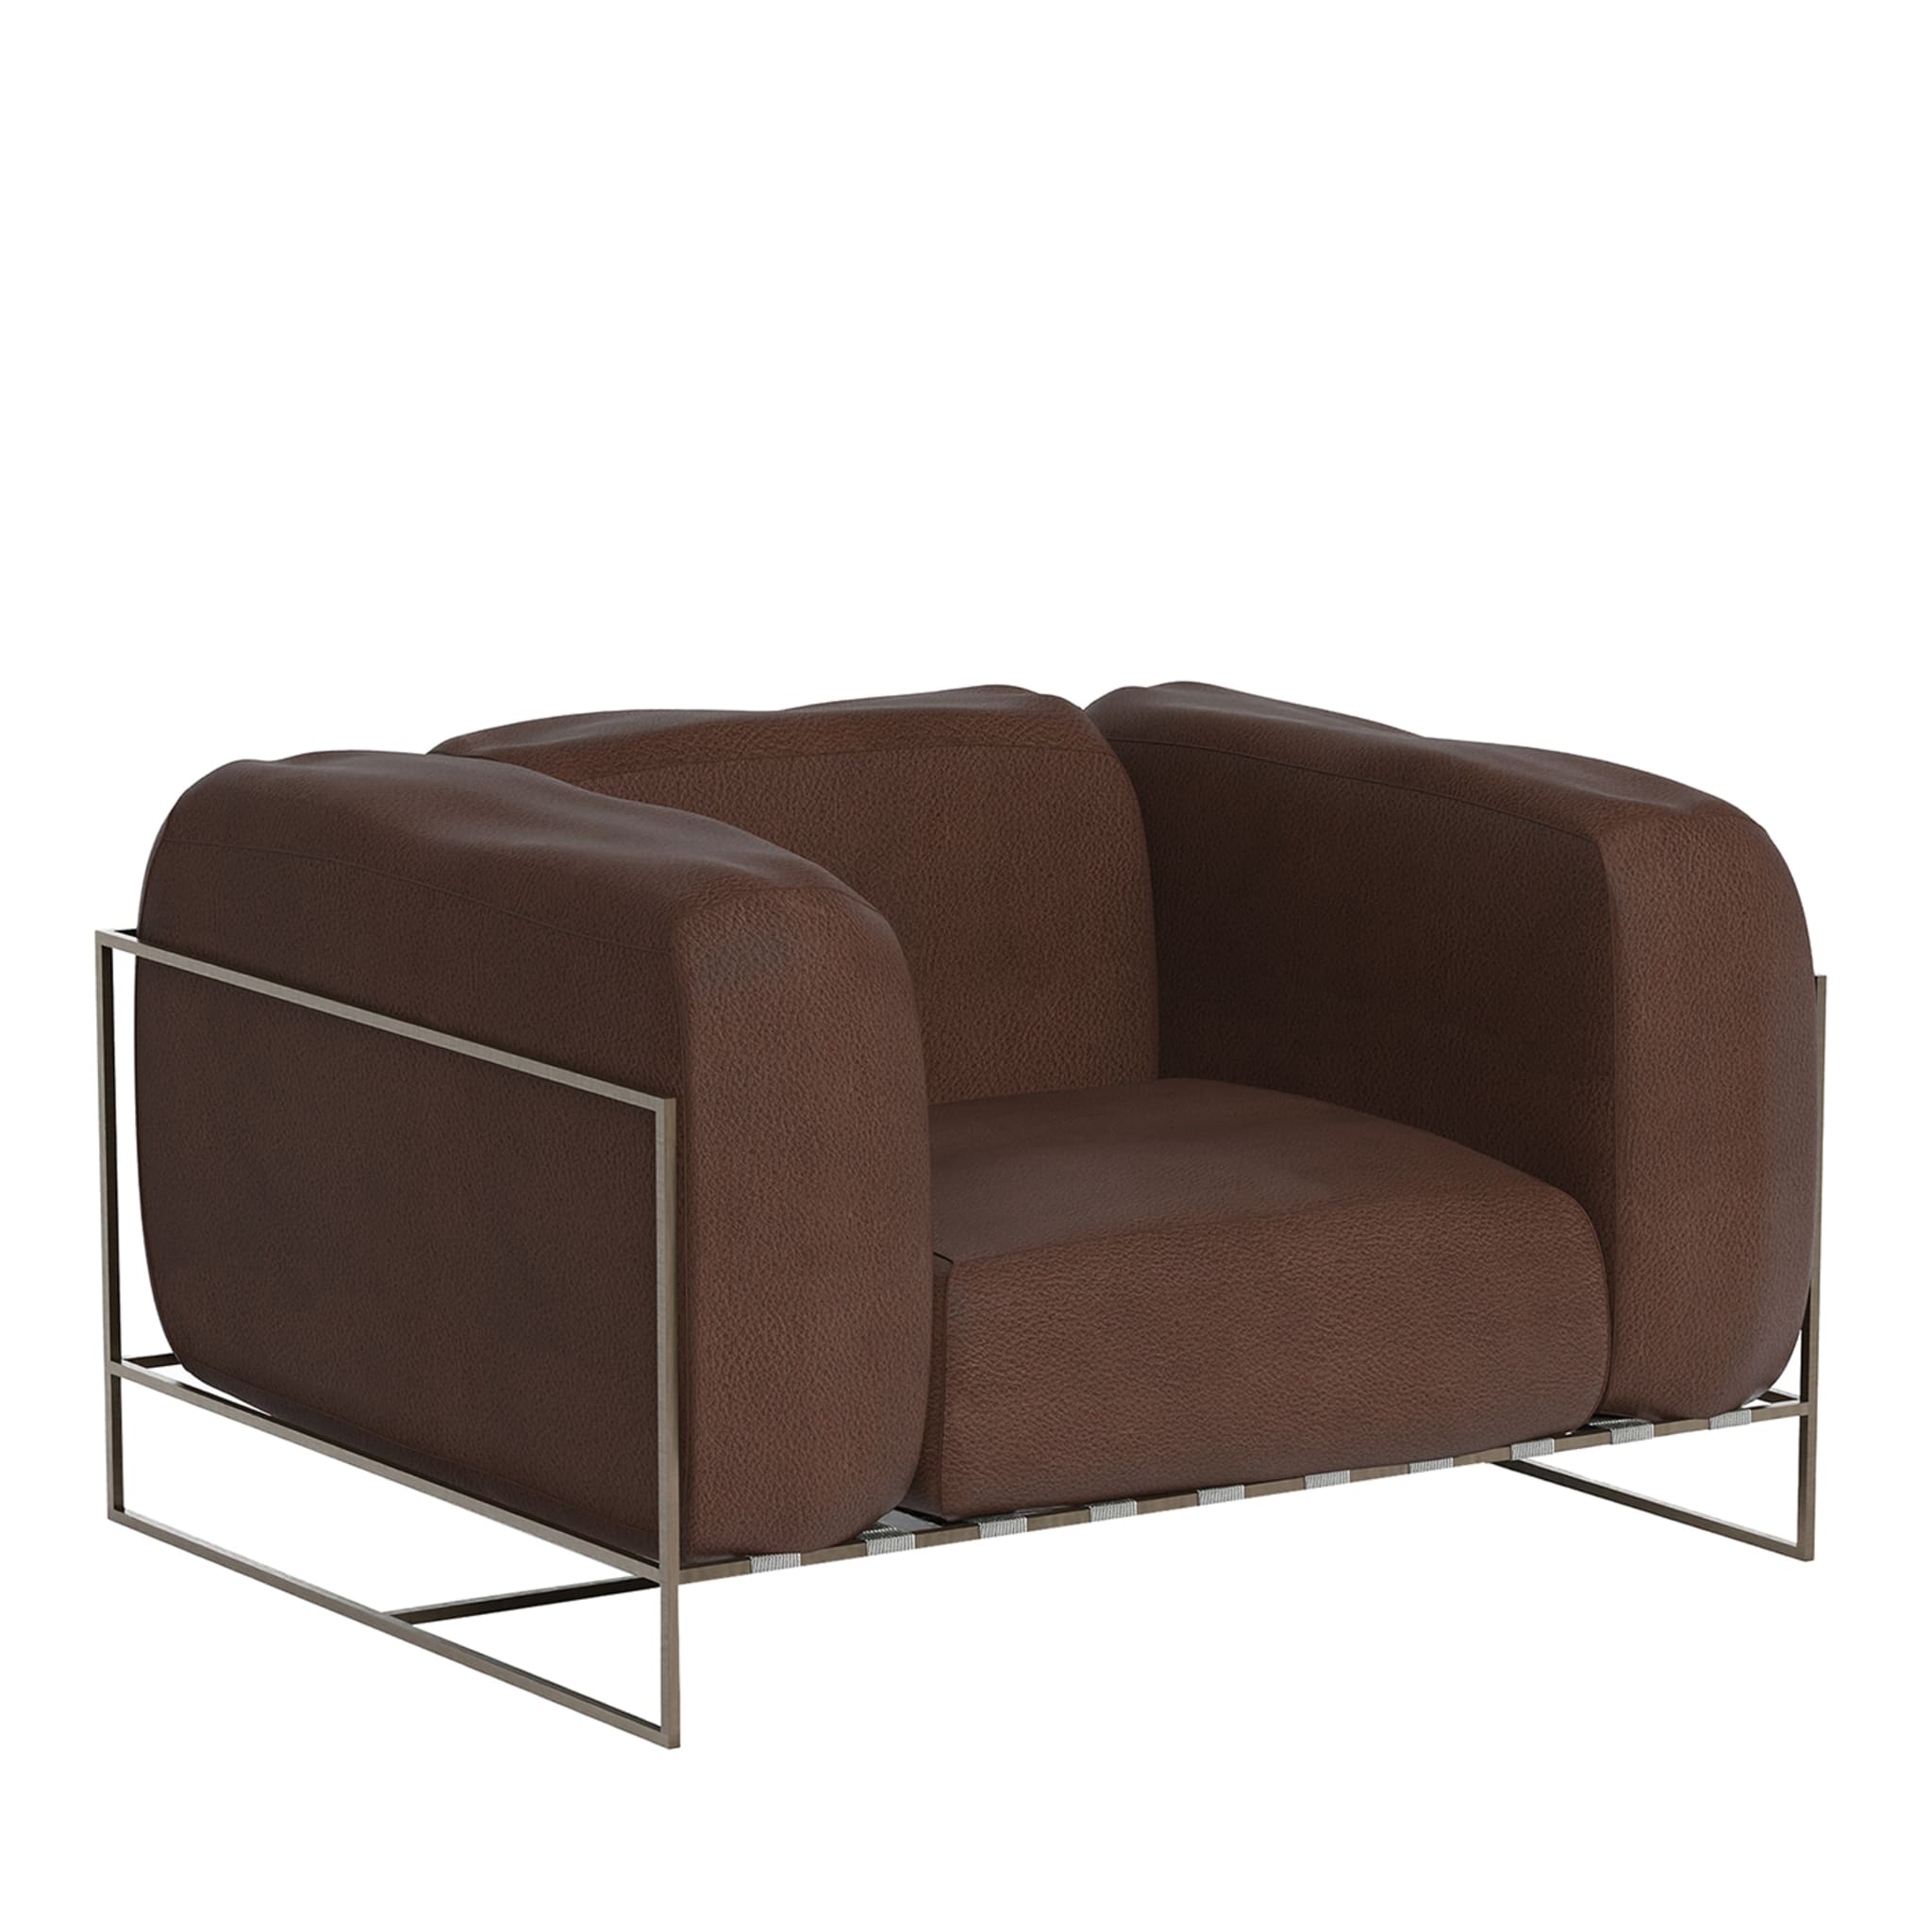 Kepler 22 Brown Leather Armchair - Main view